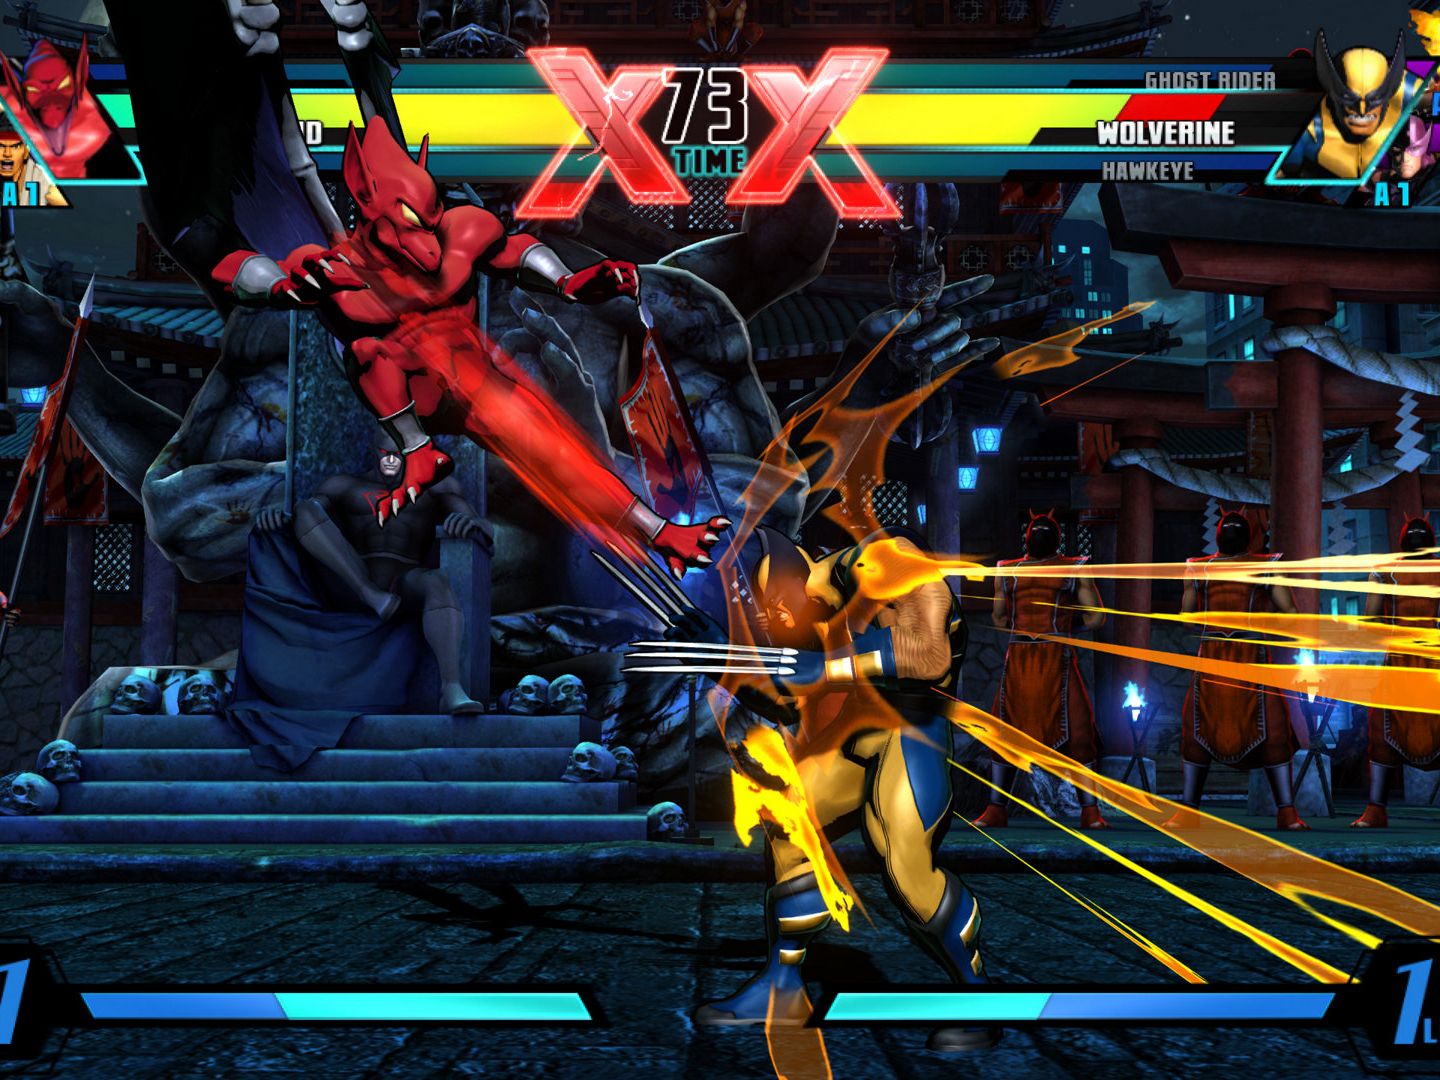 Ultimate Marvel Vs Capcom 3 for PS4 review: A blast from the past